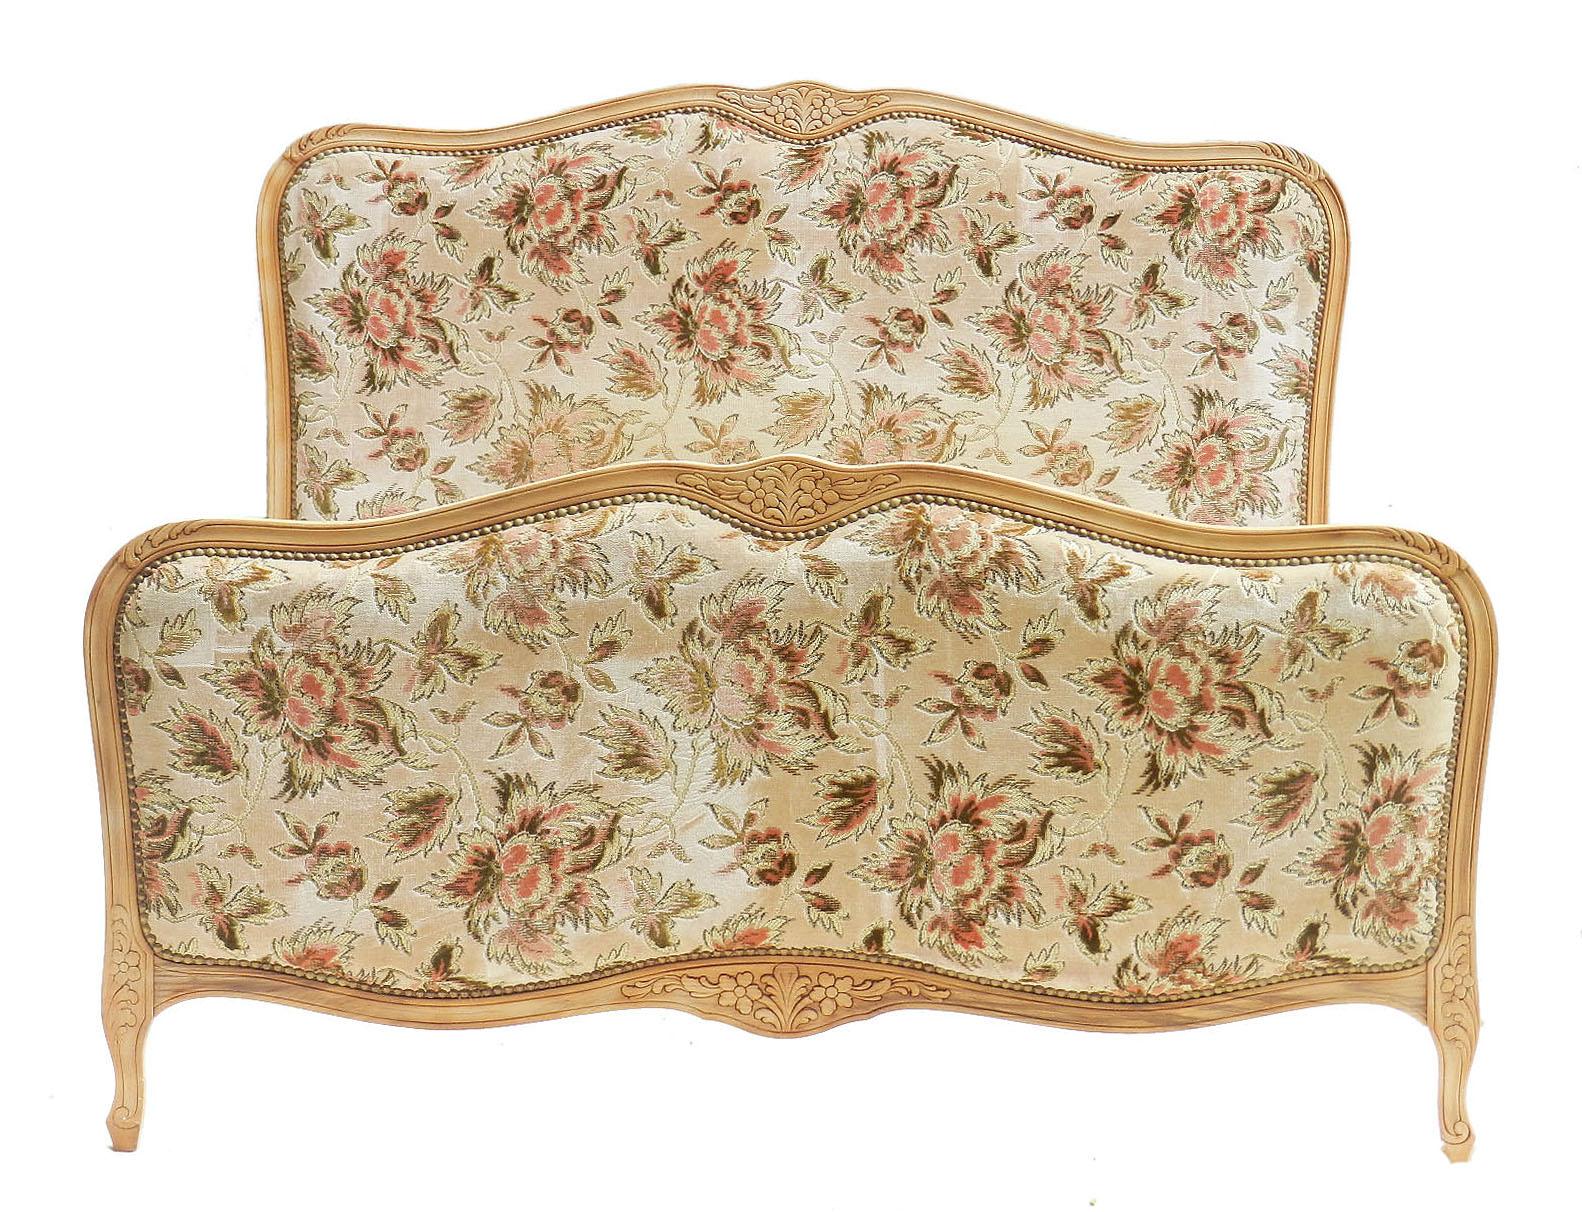 Bleached French Bed US Queen UK King Includes Recovering 20th Century Louis revival